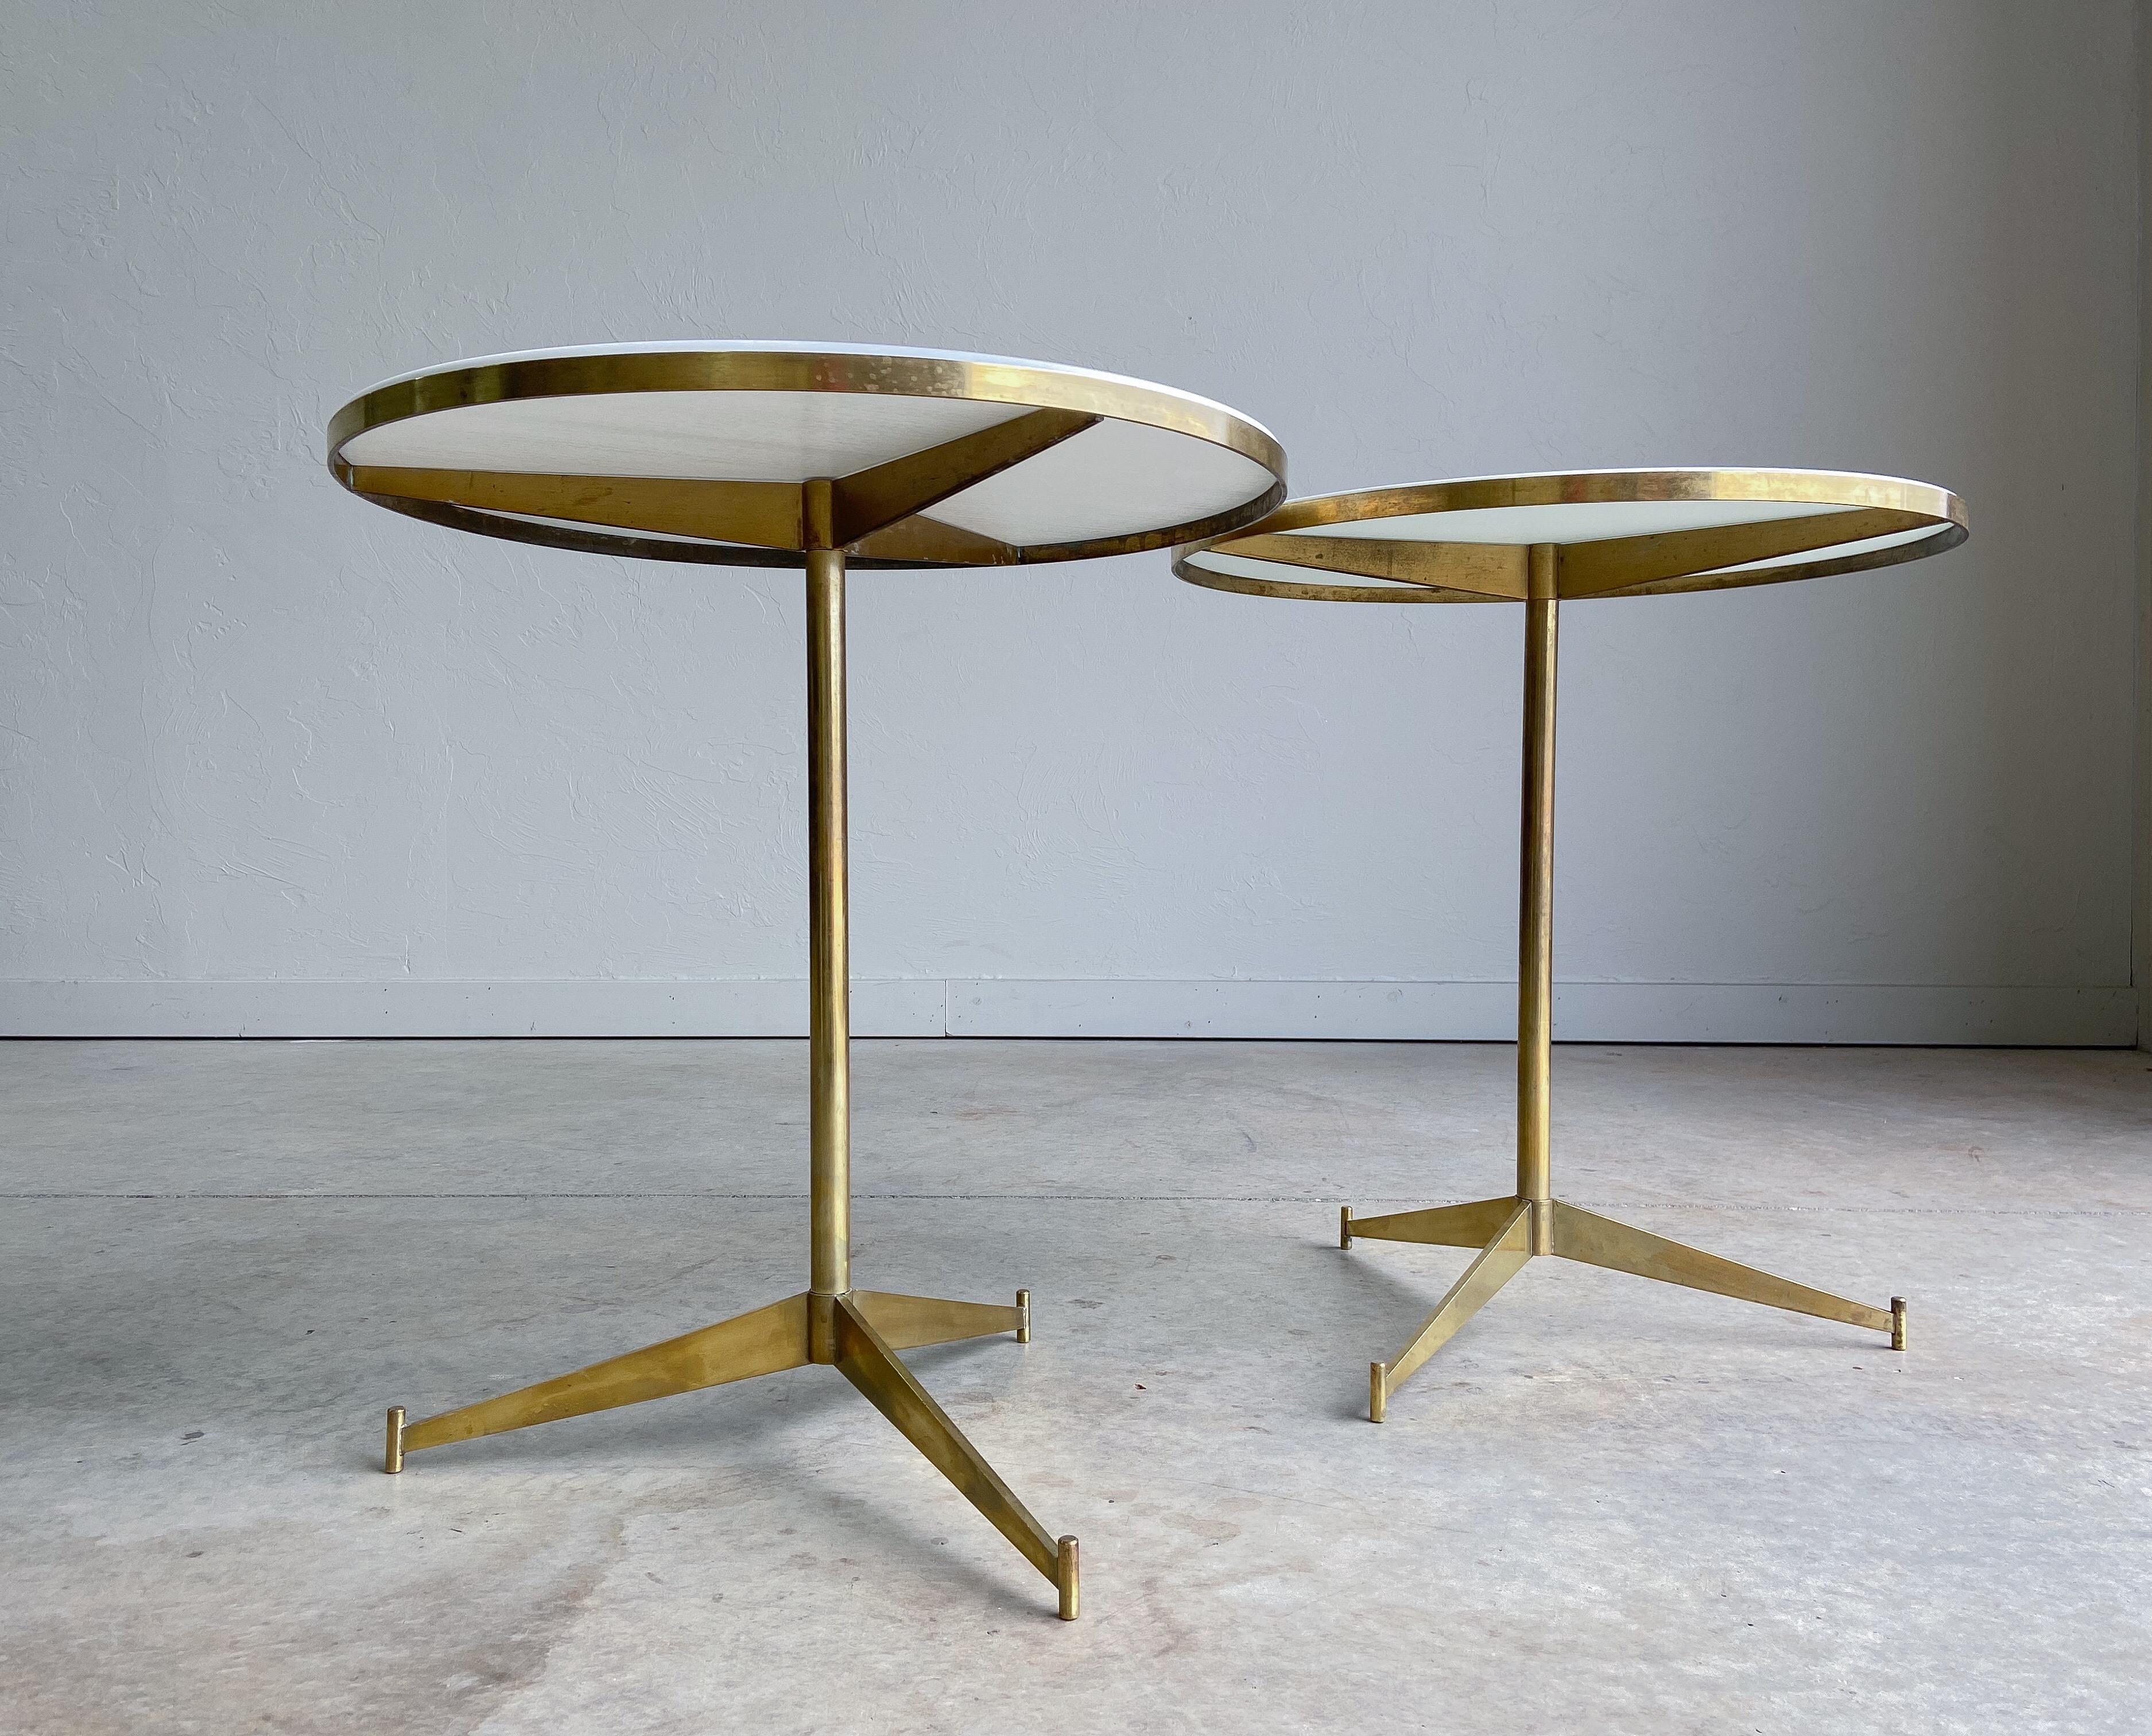 Mid-20th Century Paul McCobb for Directional Brass and Vitrolite “Cigarette” Table, 1954 For Sale